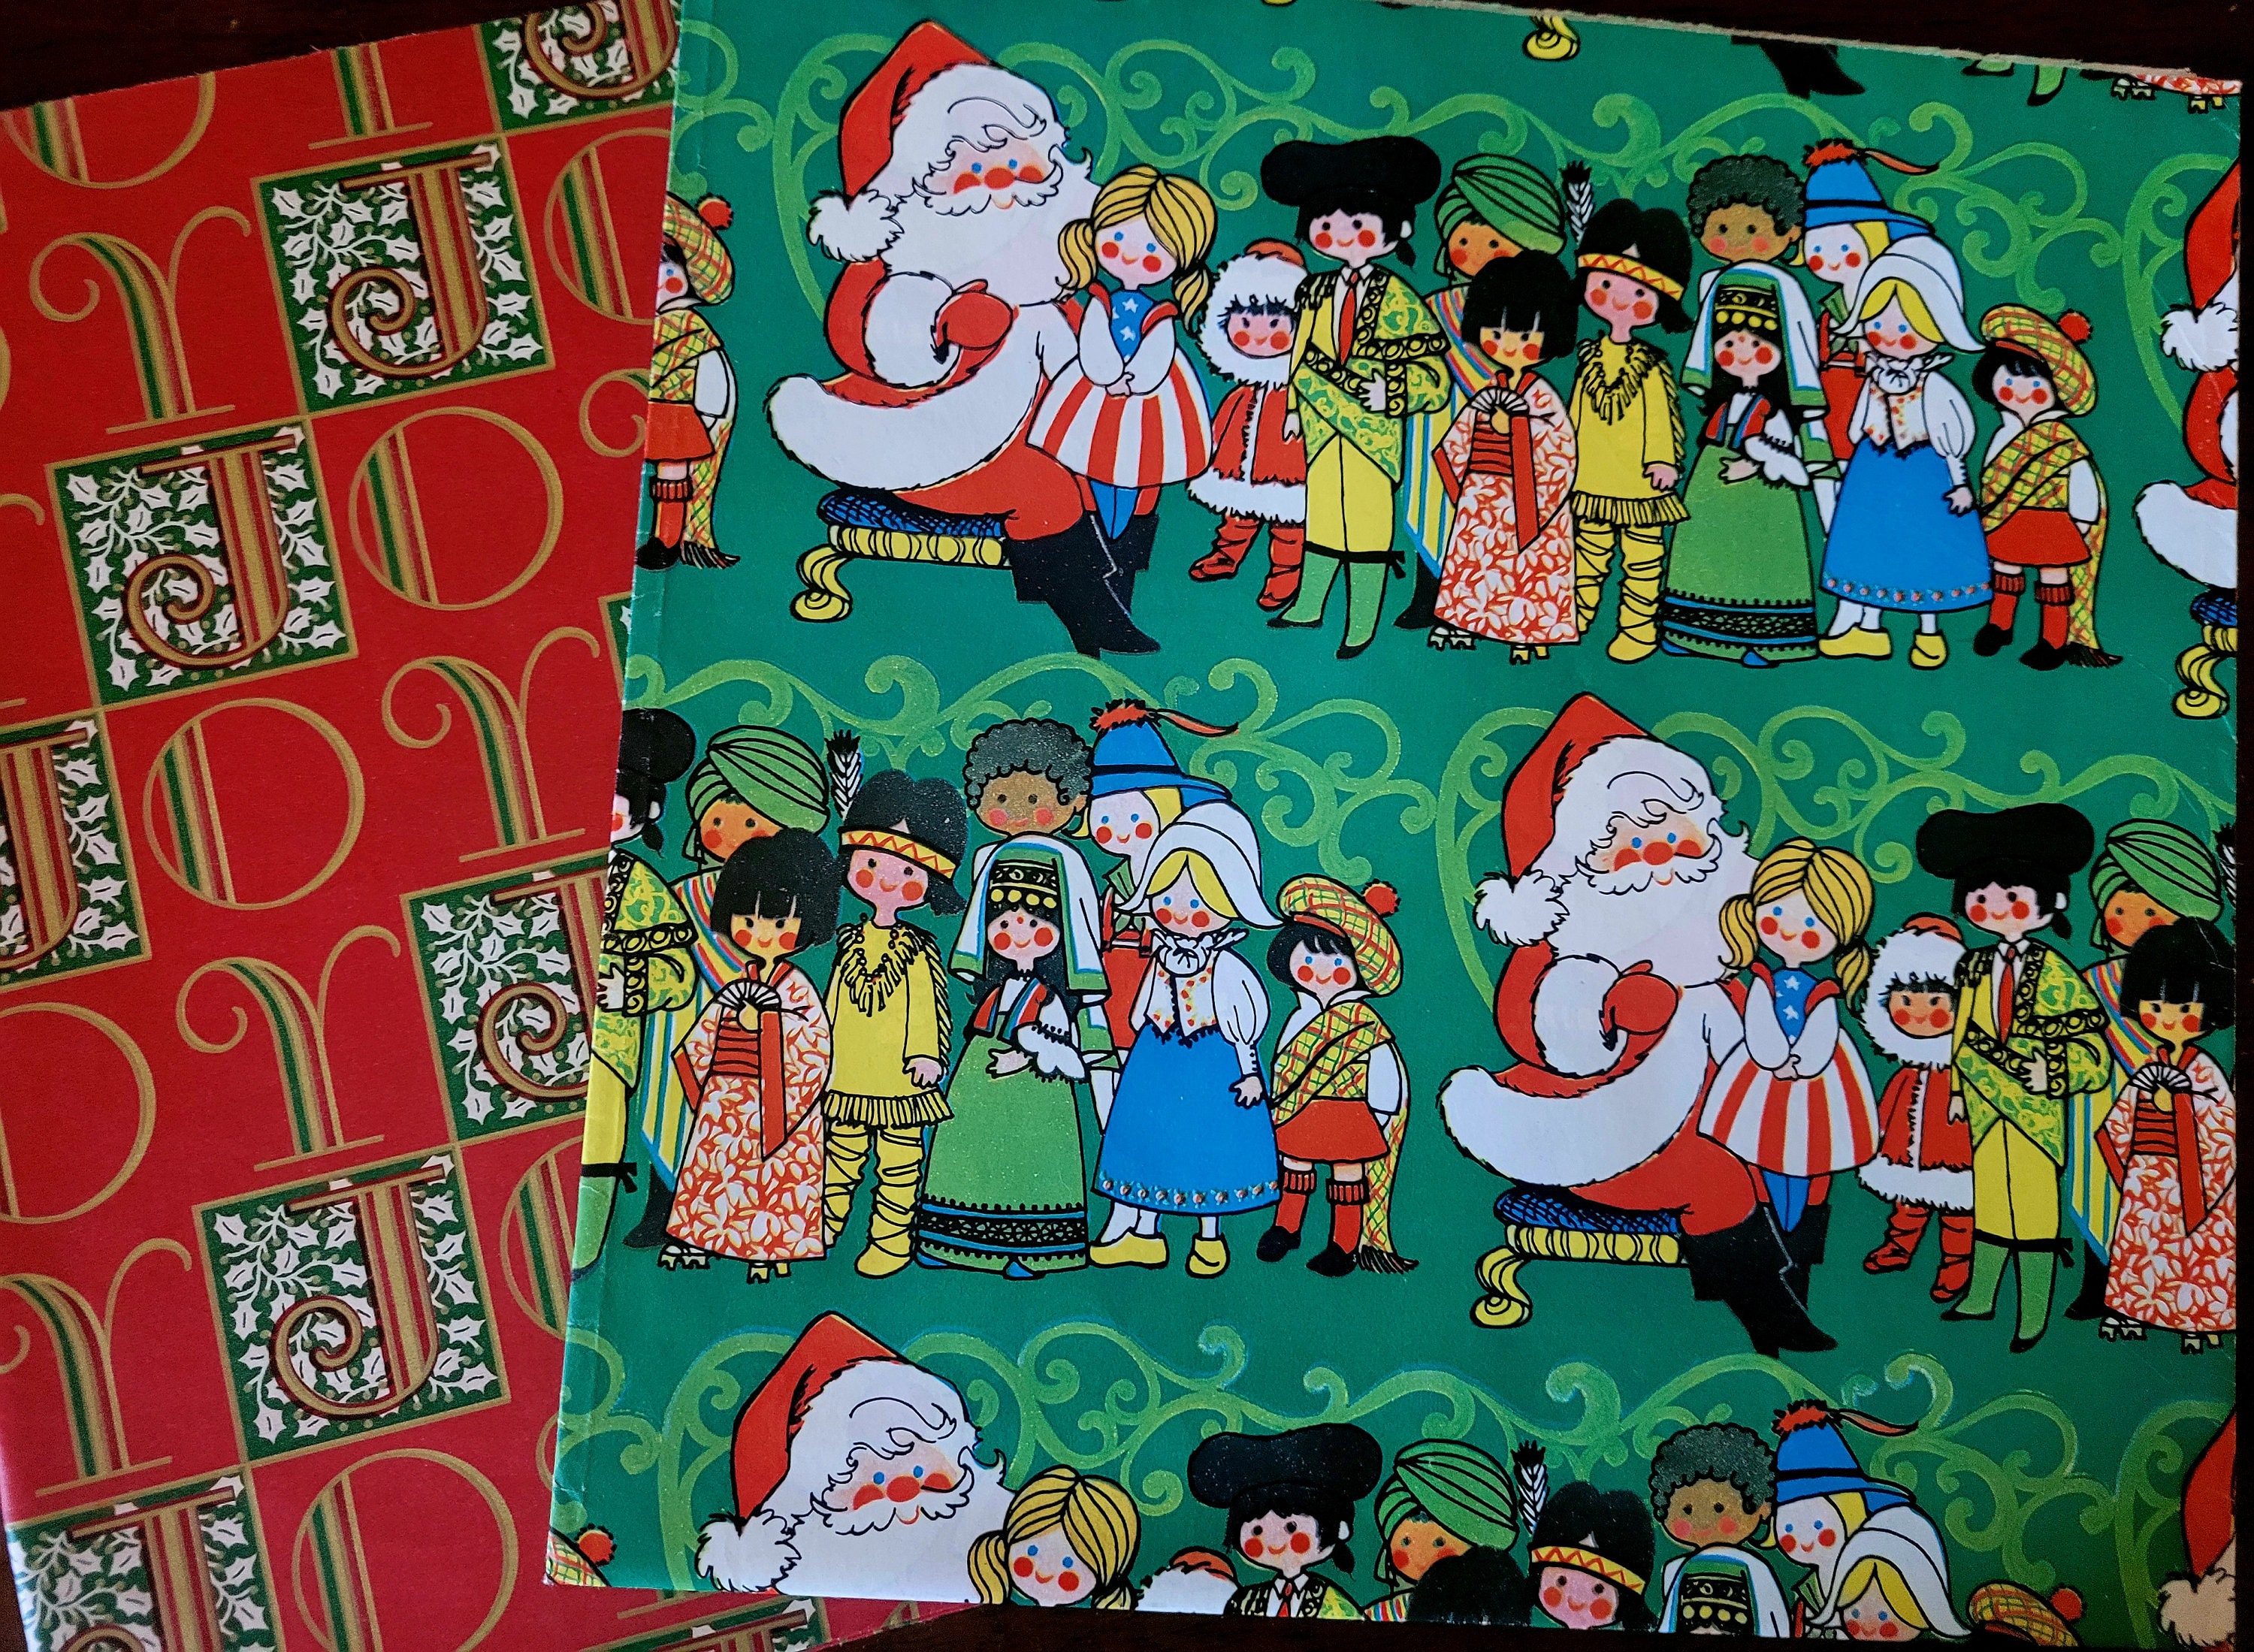 Vintage Hallmark Christmas Wrapping Paper Gift Wrap 14 Sheets Unopened  Packages 